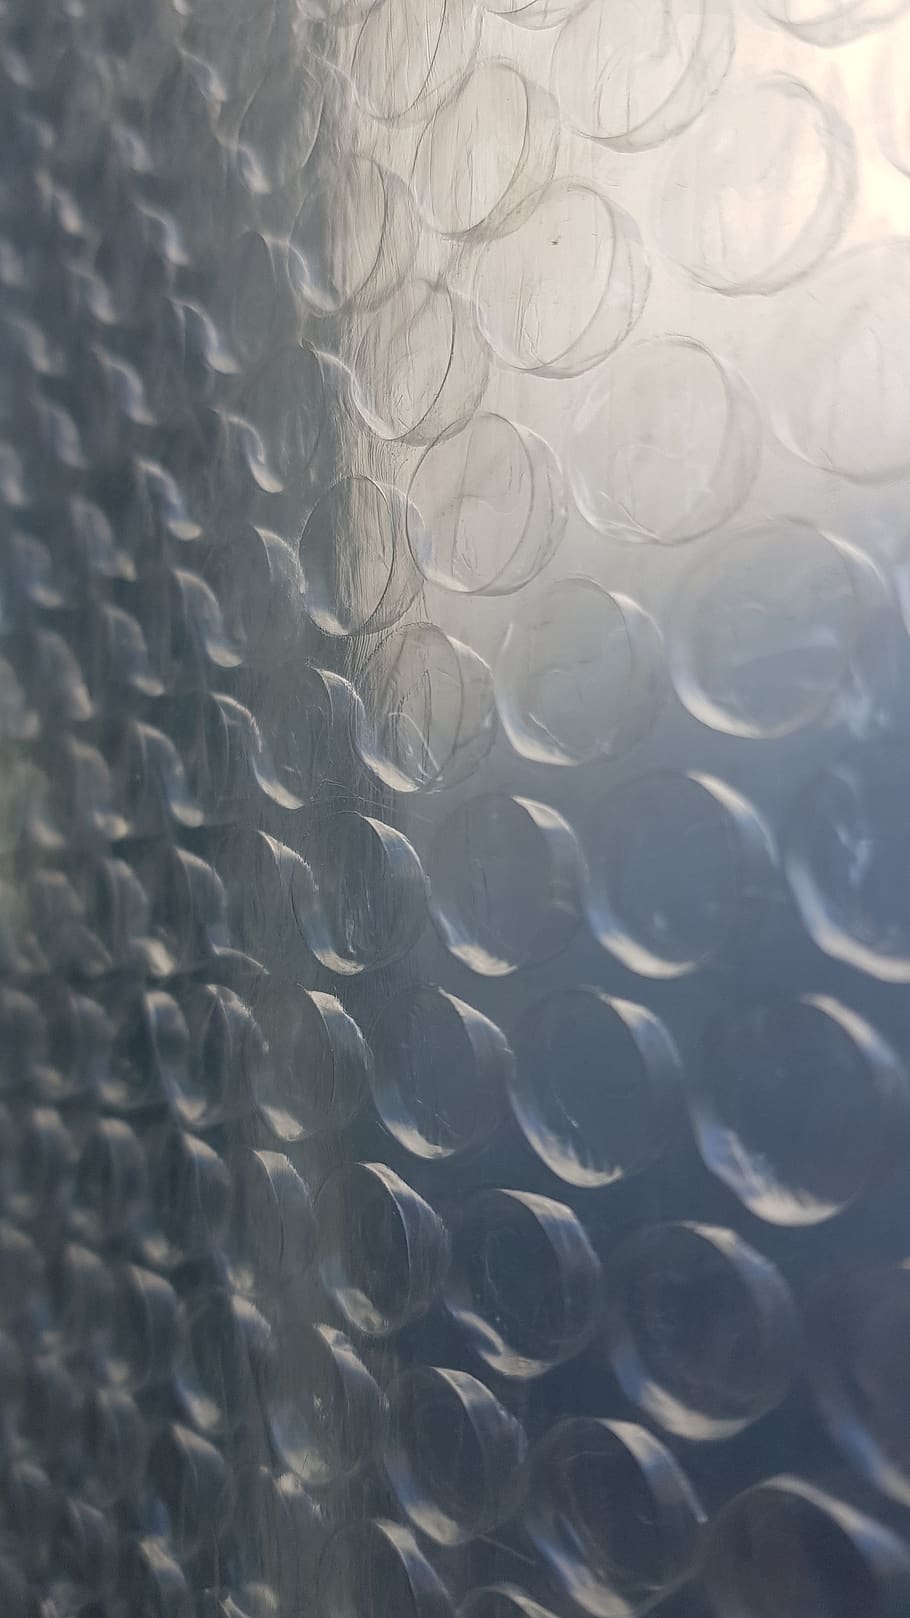 260 Bubble Wrap Wallpaper Stock Photos HighRes Pictures and Images   Getty Images